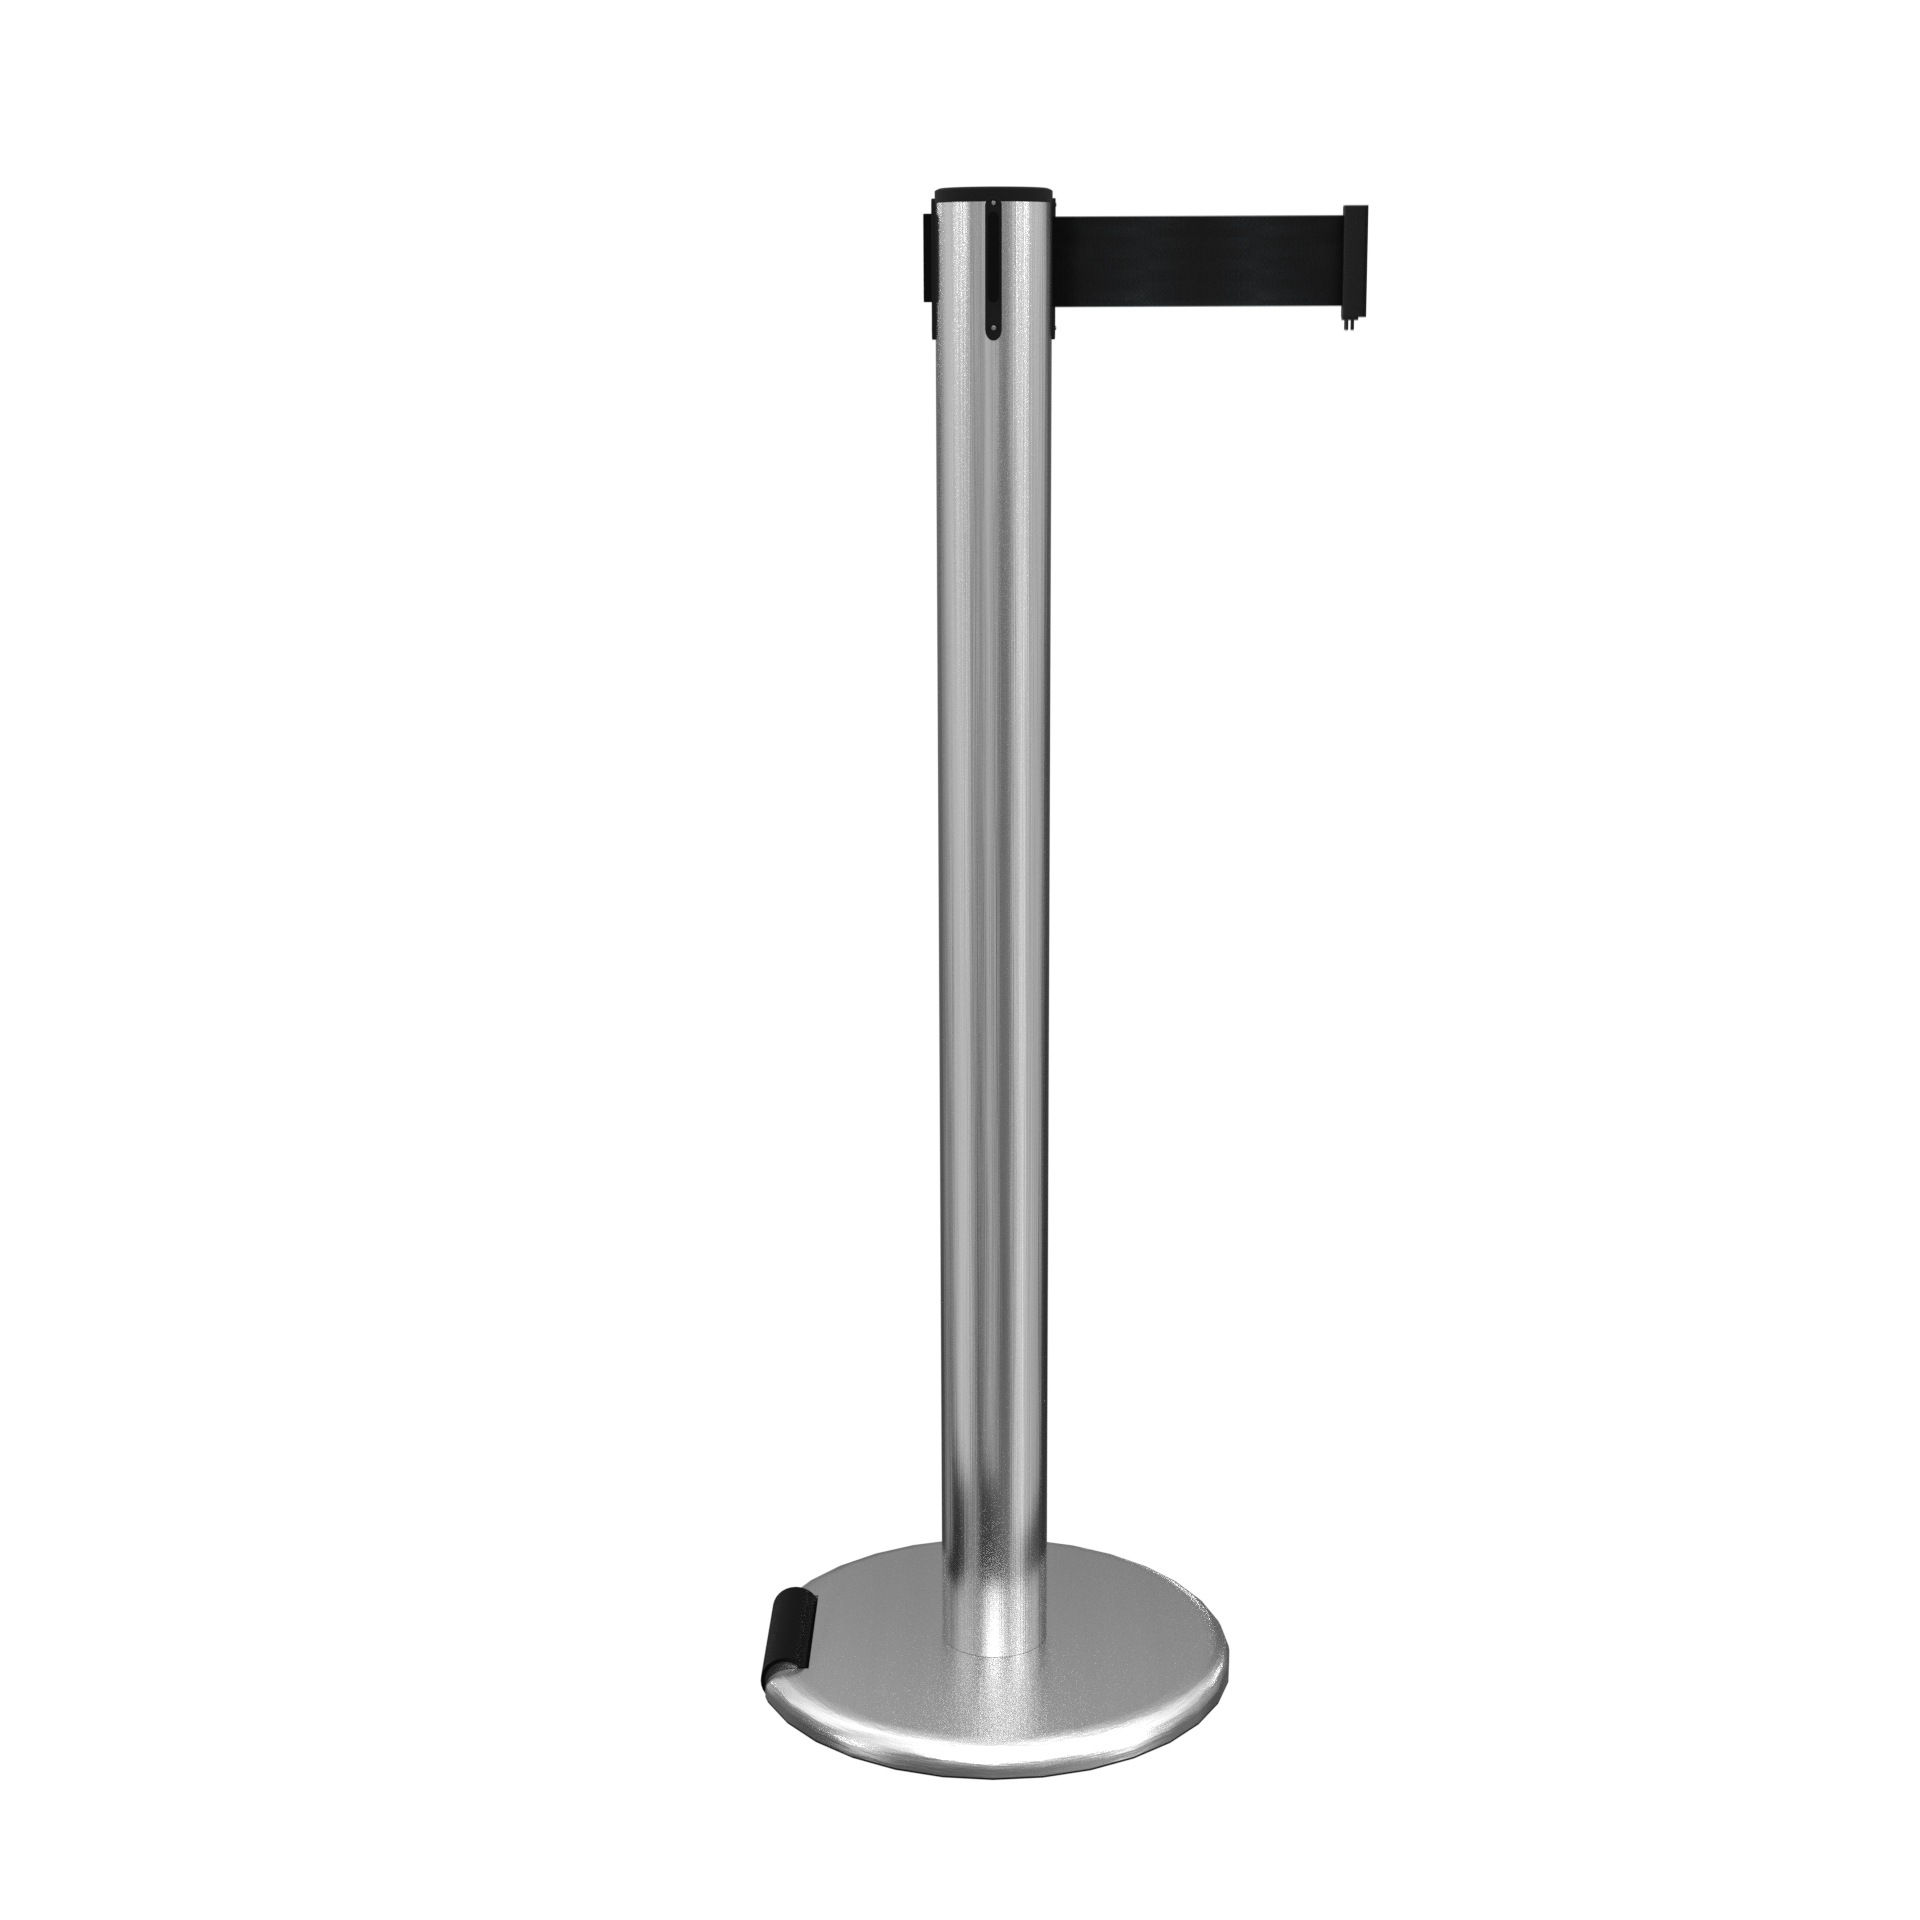 Portable Roller Pro 300 Stanchion Model with Satin Stainless Finish